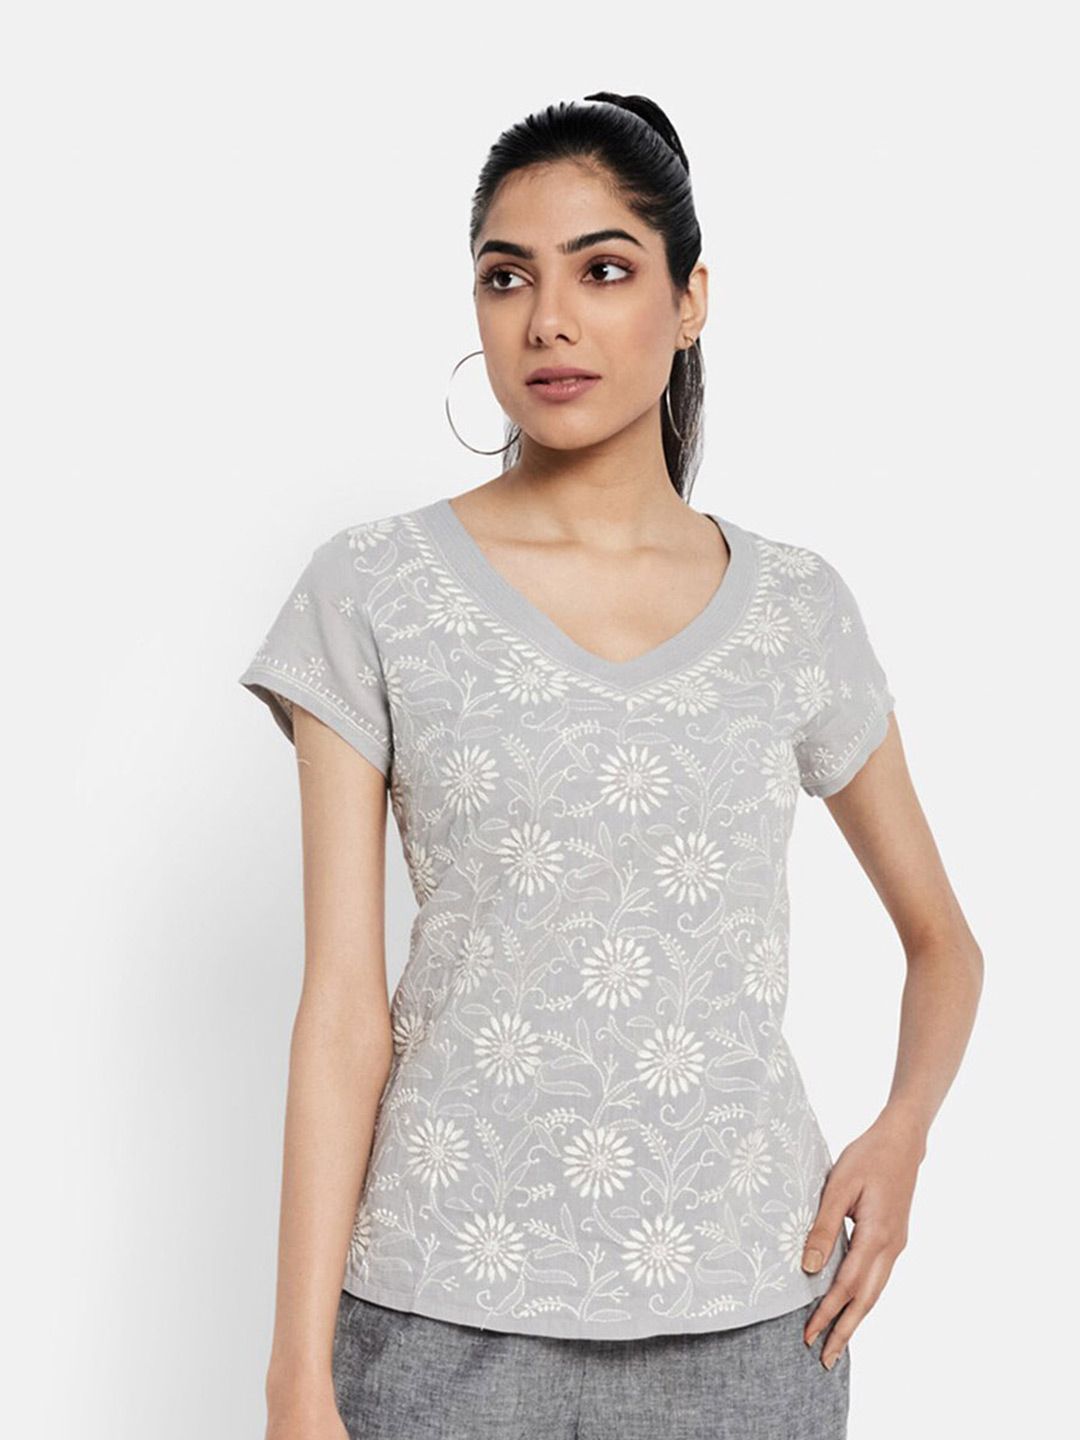 Fabindia Floral Printed V-Neck Pure Cotton Tops Price in India